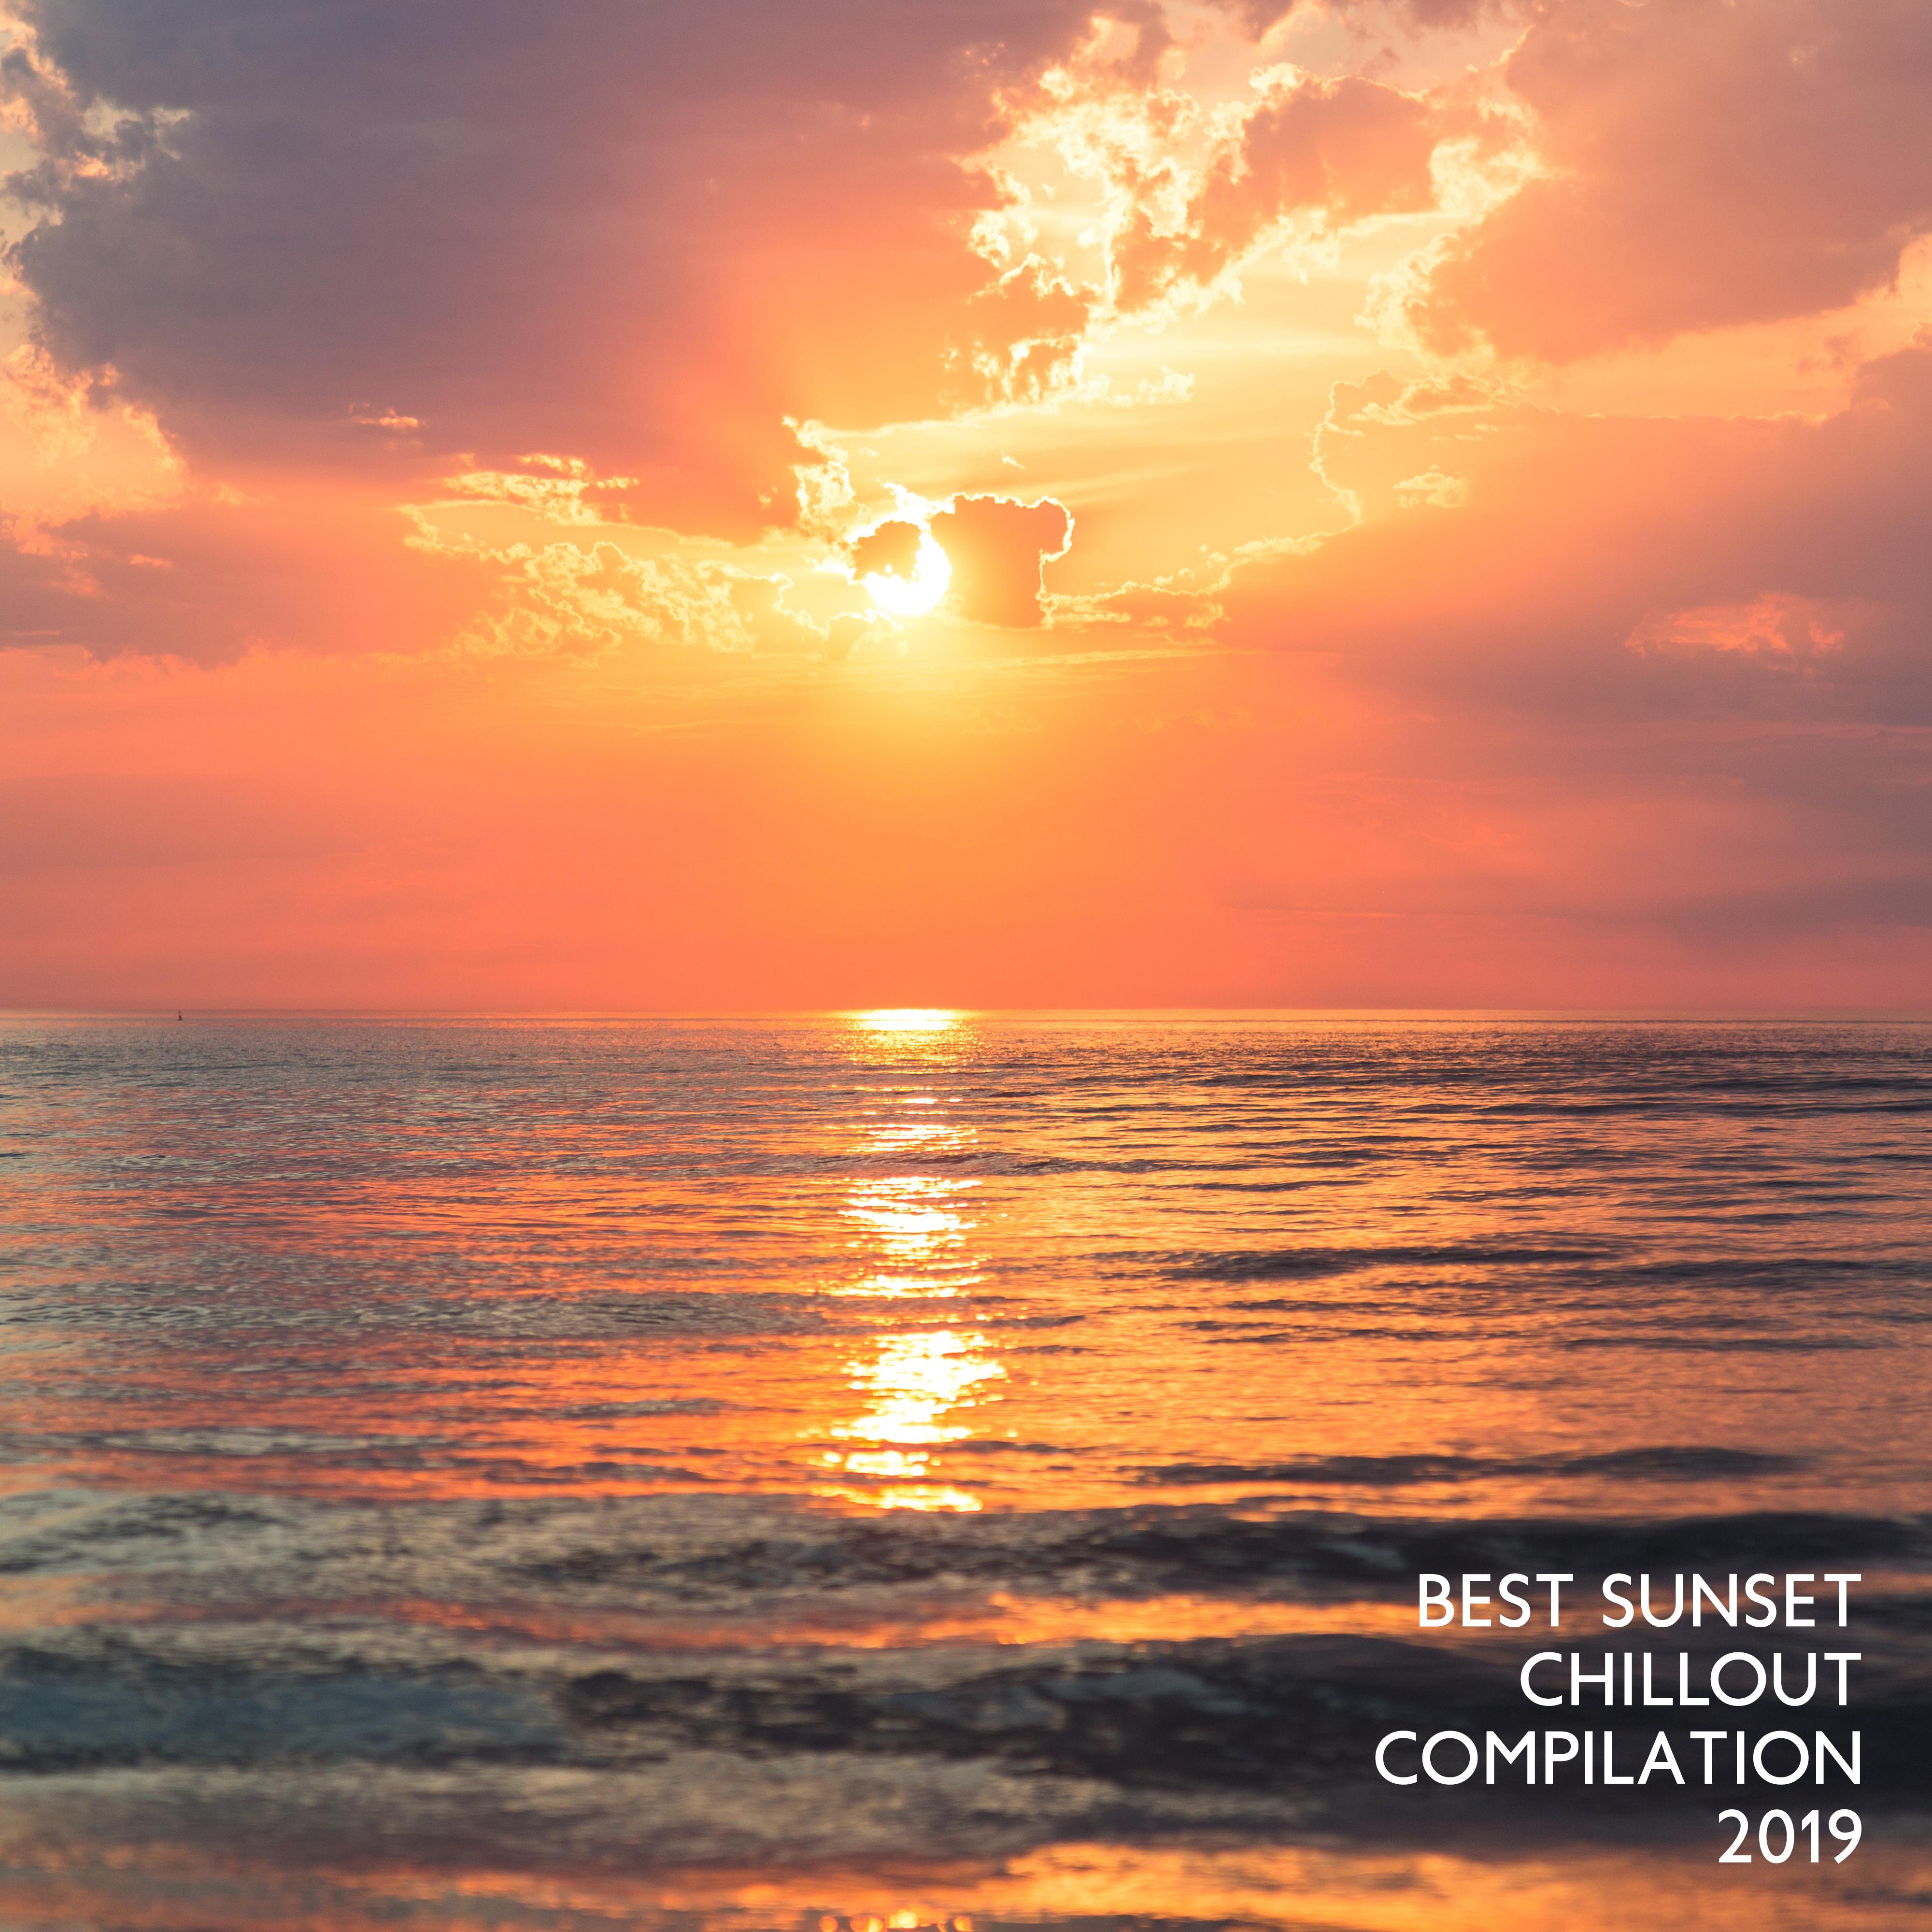 Best Sunset Chillout Compilation 2019